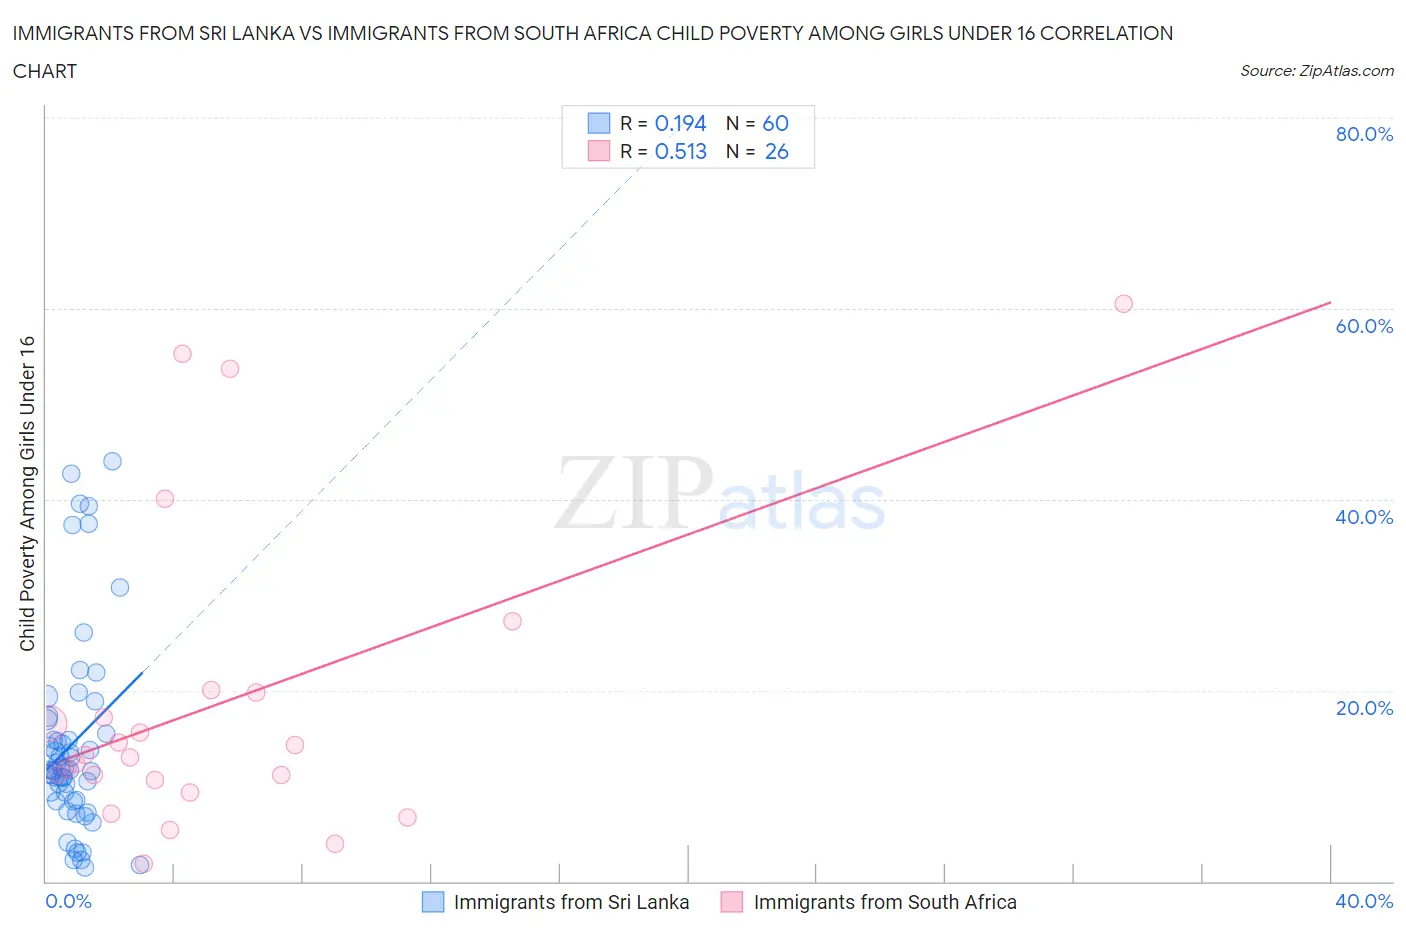 Immigrants from Sri Lanka vs Immigrants from South Africa Child Poverty Among Girls Under 16